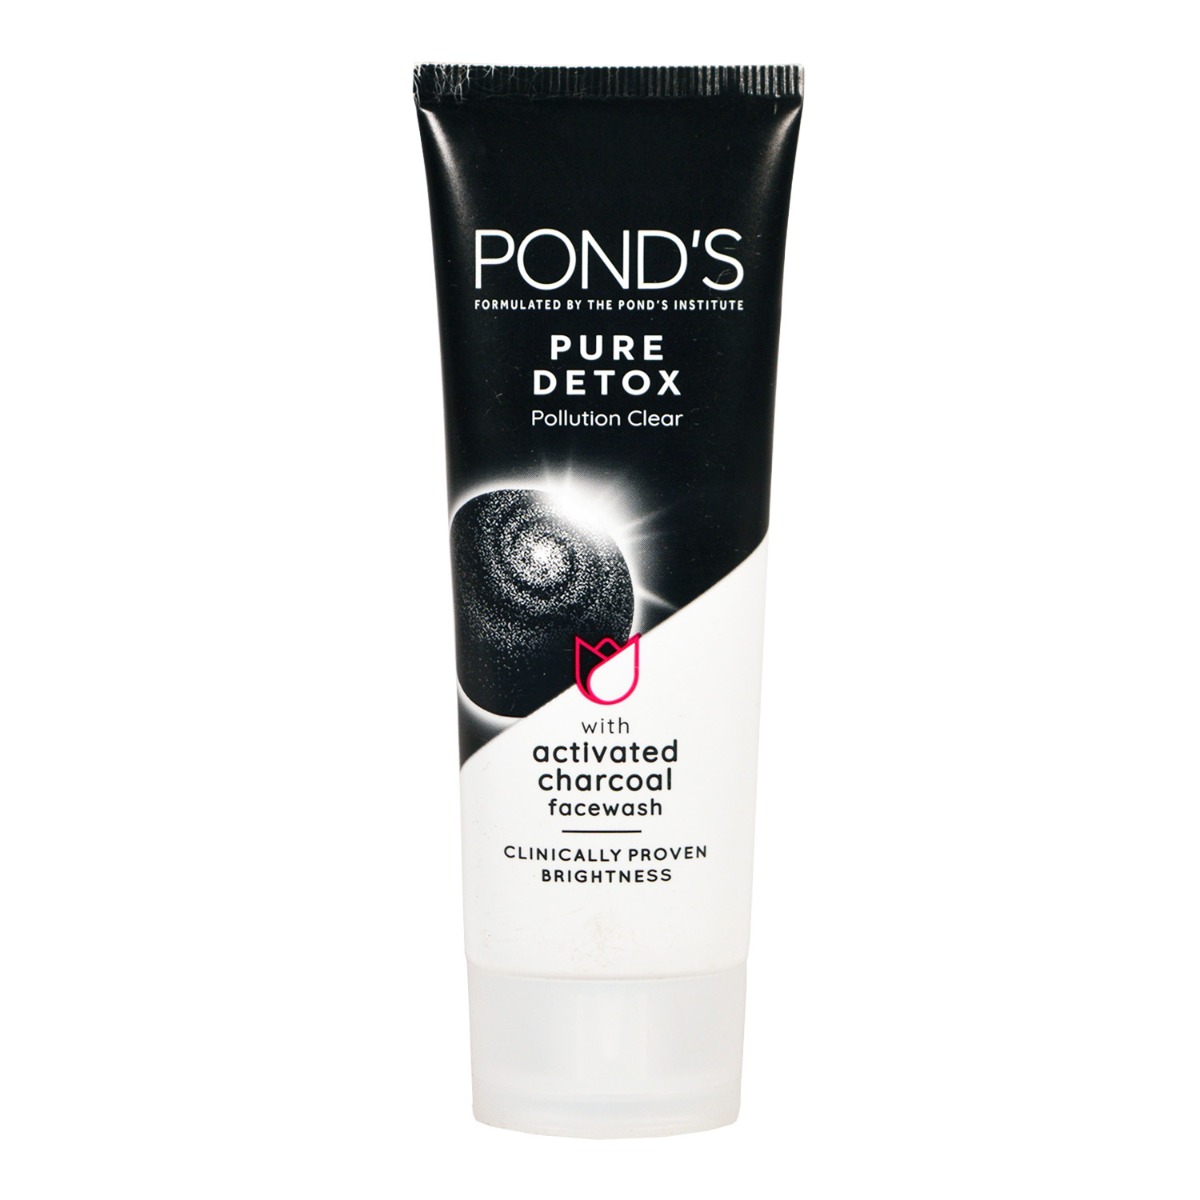 POND'S Pure Detox Pollution Clear With Activated Charcoal Face Wash, 50gm